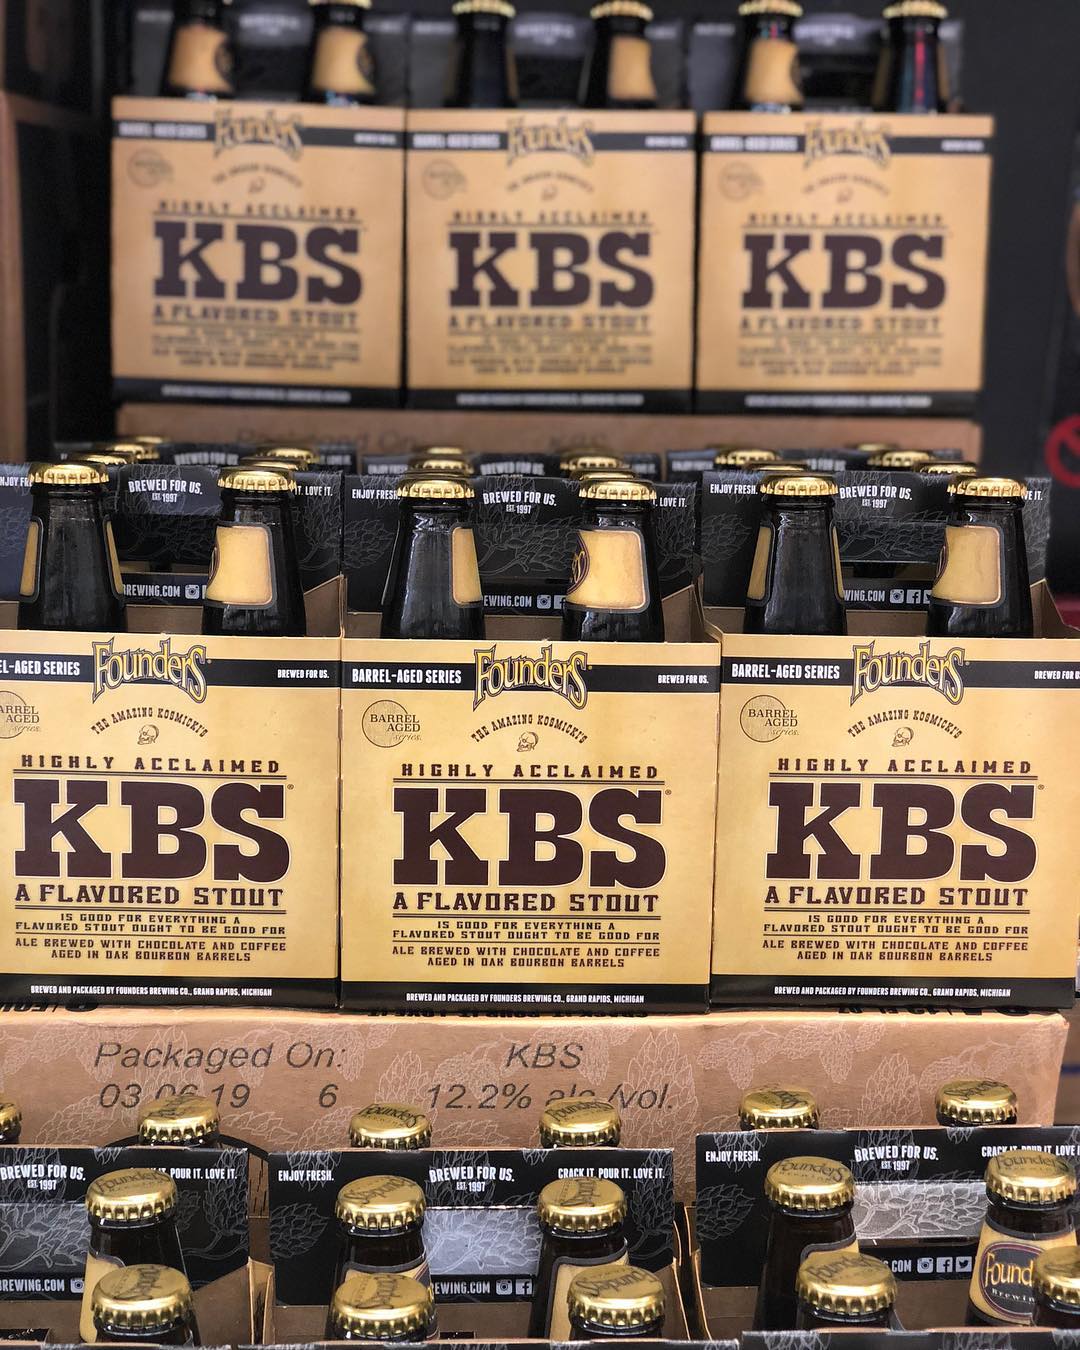 @foundersbrewing KBS is now in stock at our Perkins Rd location for the #lowprice of…